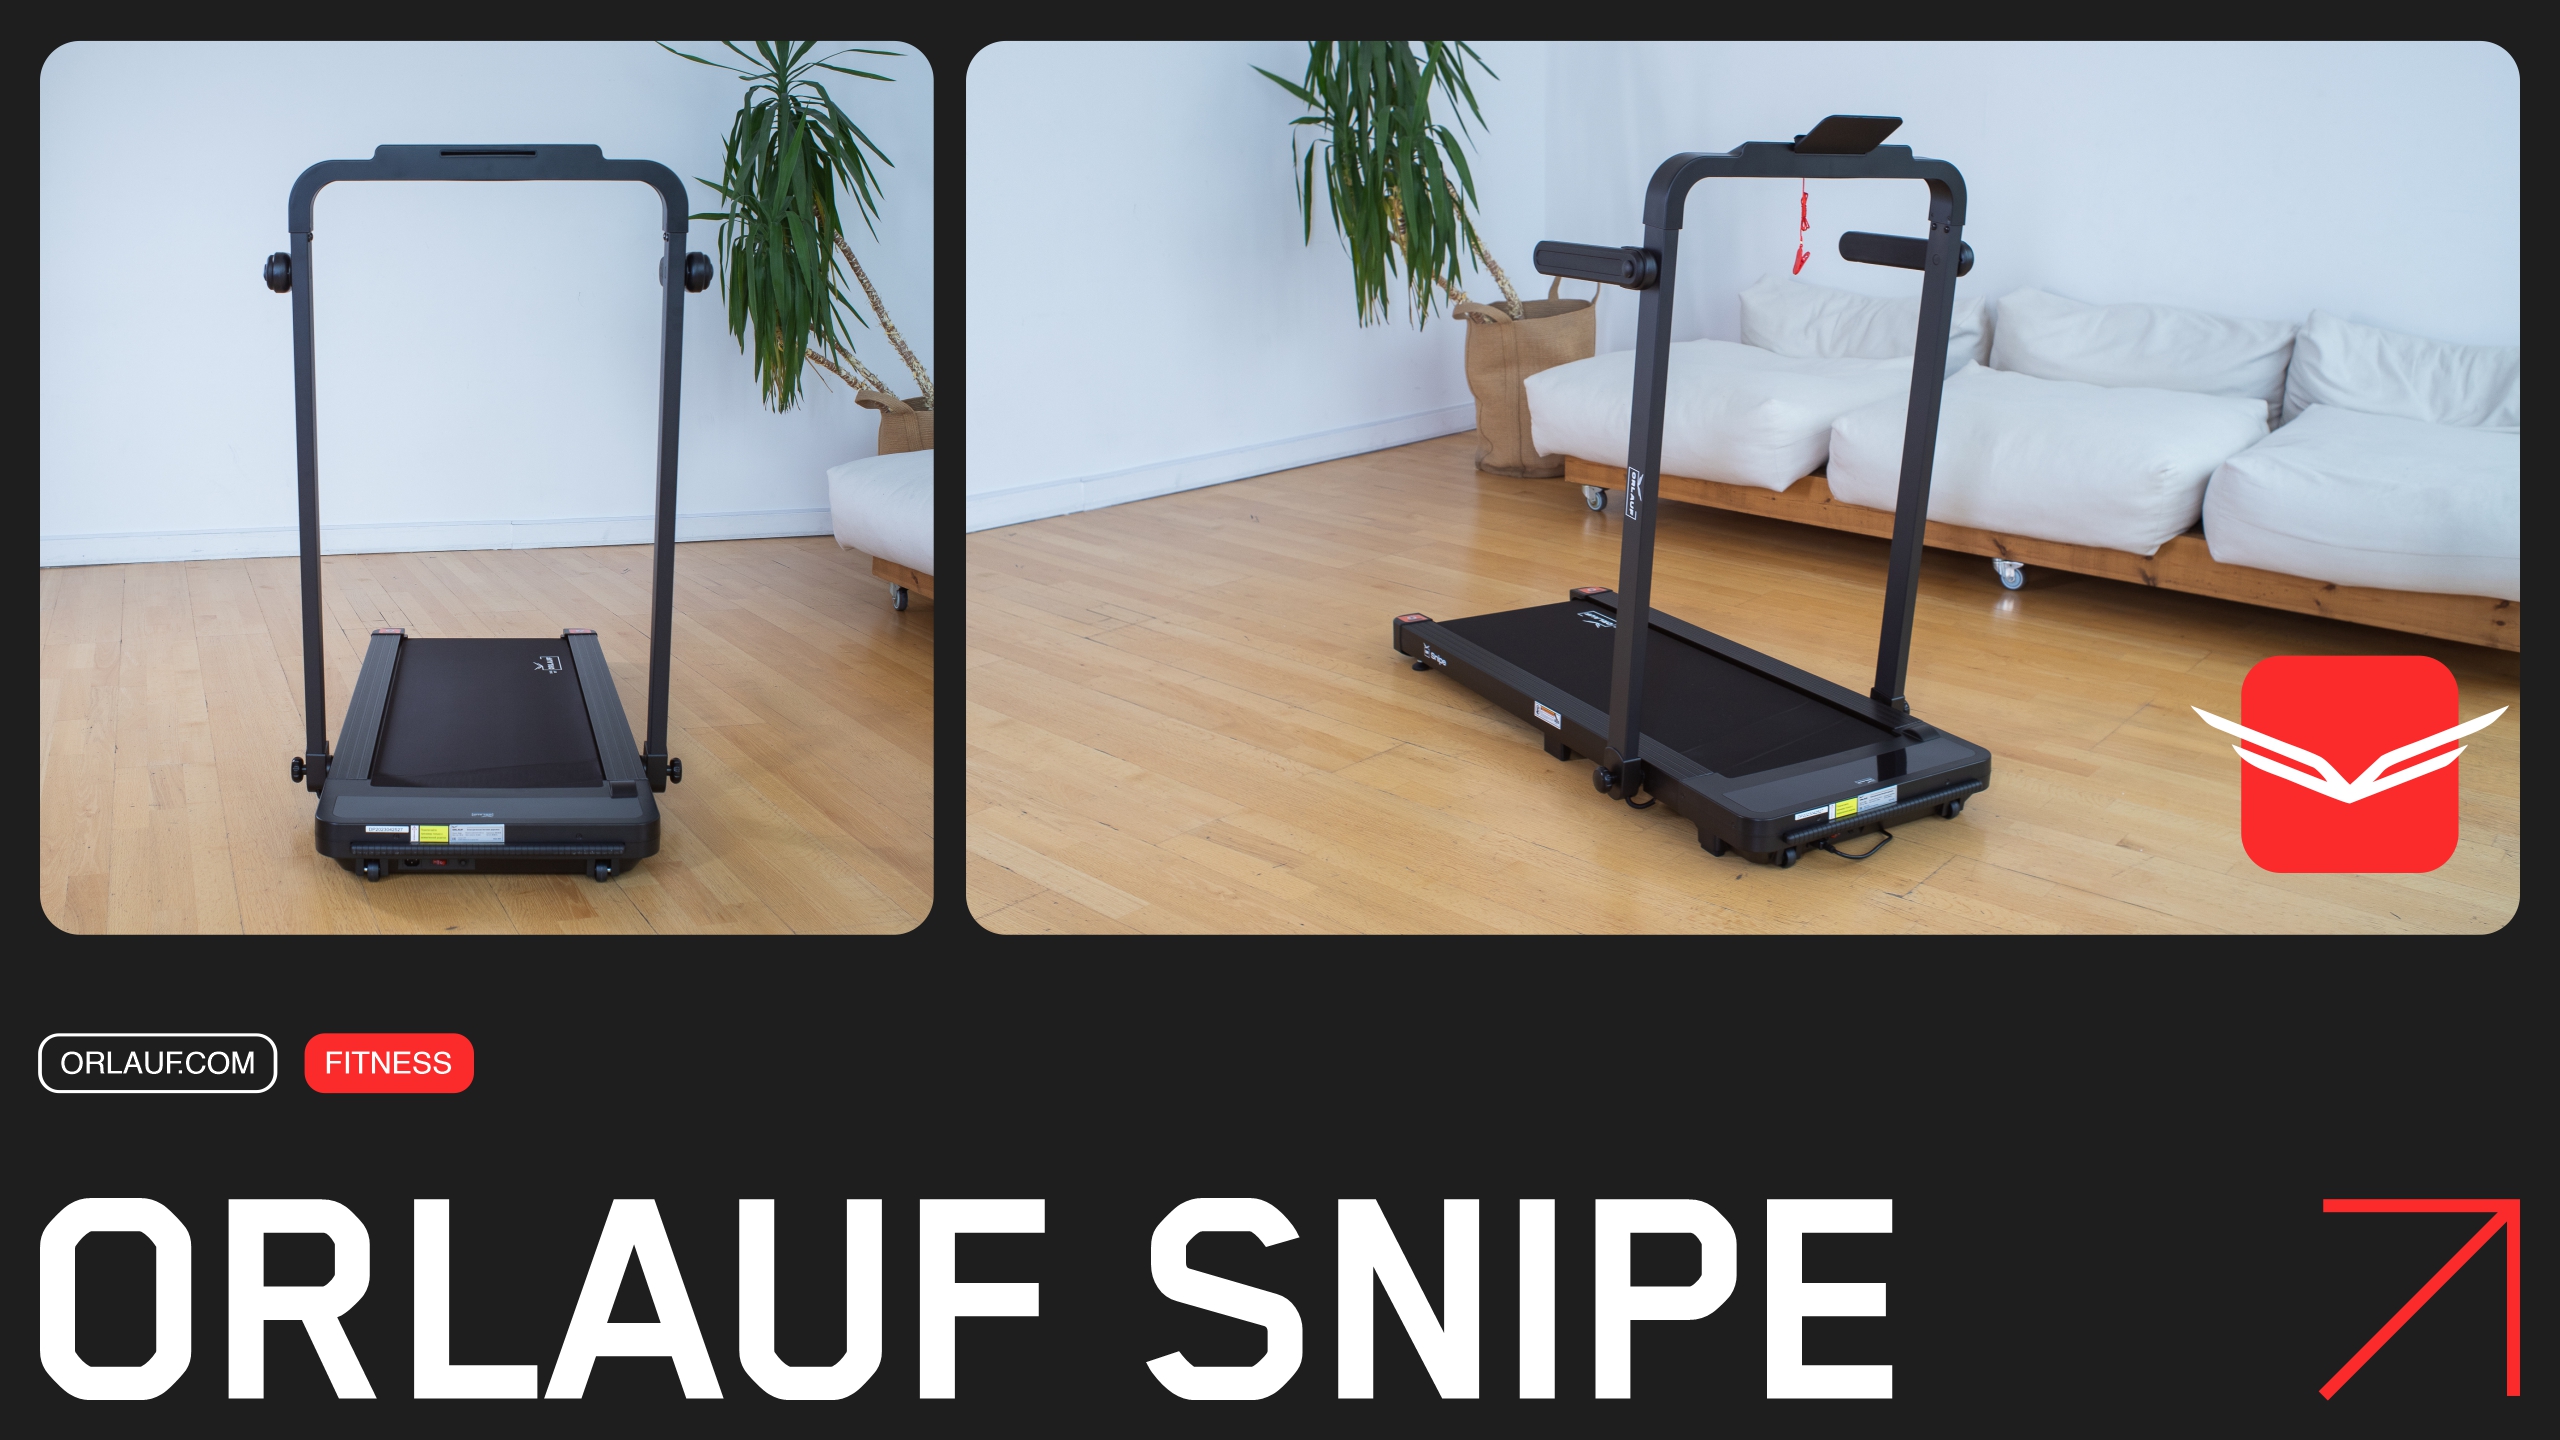 Video review of the treadmill Orlauf Snipe